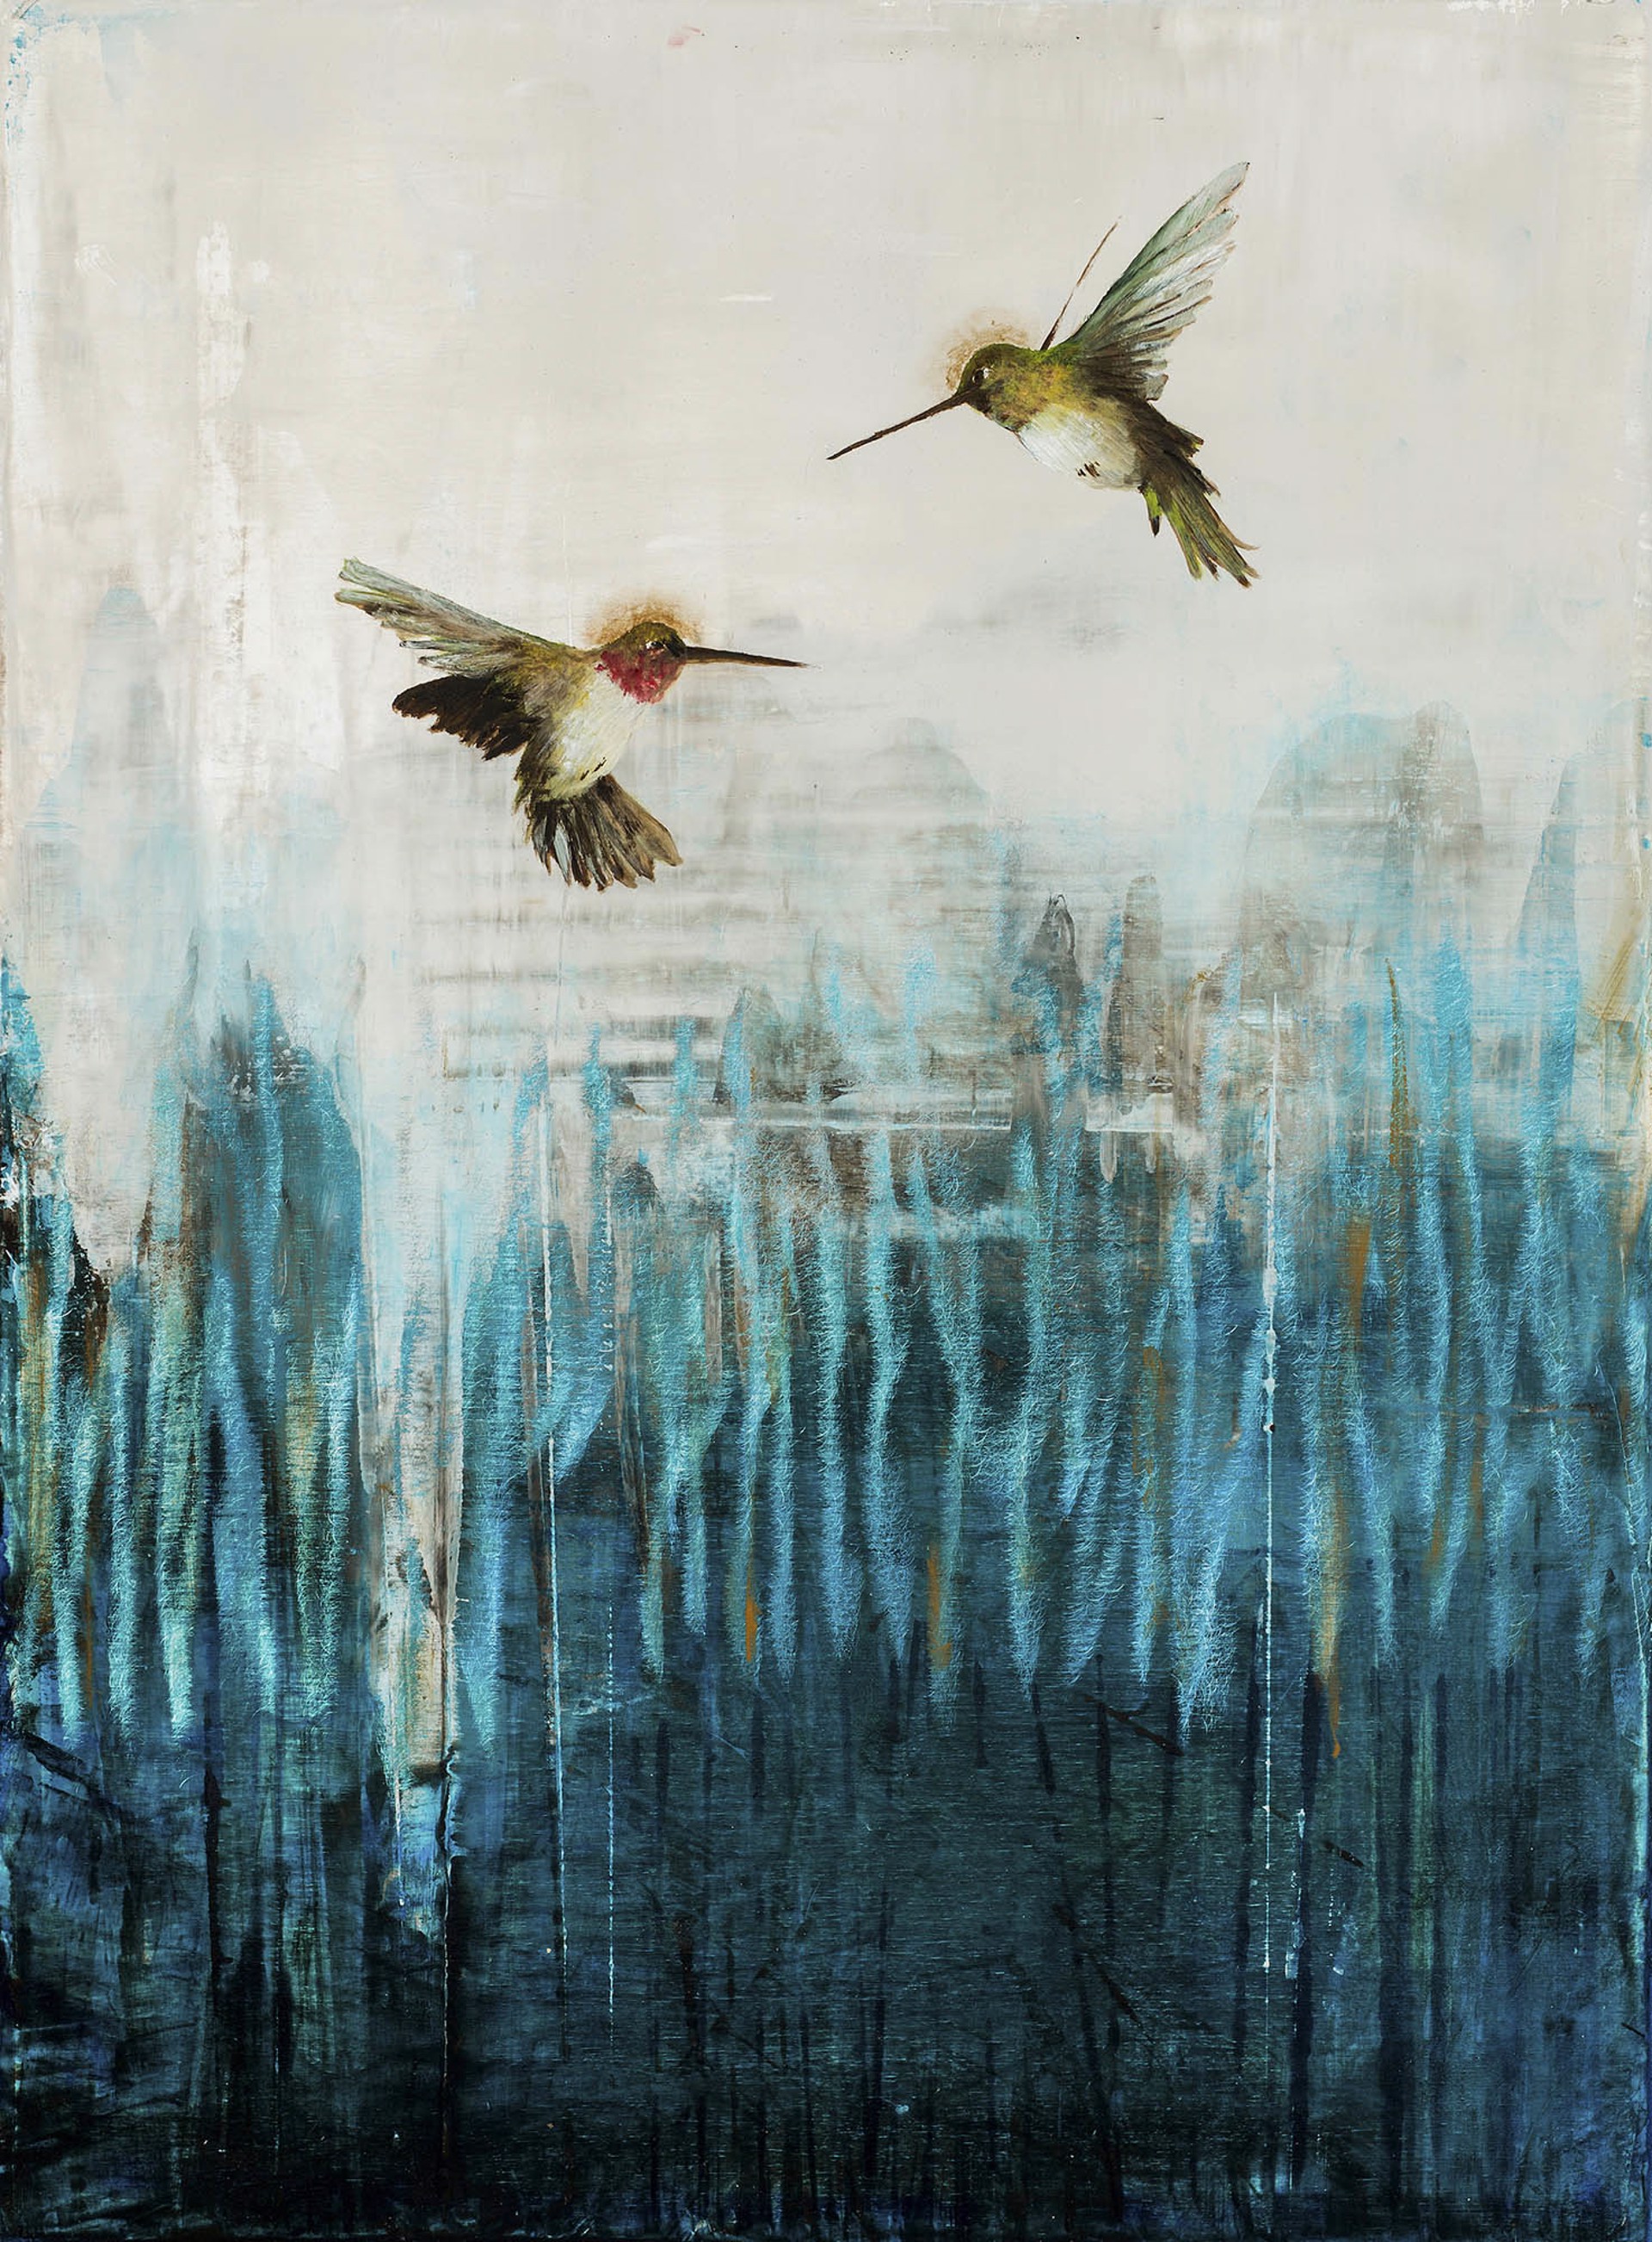 Contemporary Oil Painting Of Two Humming Birds In Flight With An Abstract Background Of White Fading To Blue,  Fine Art By Jenna Von Benedik 